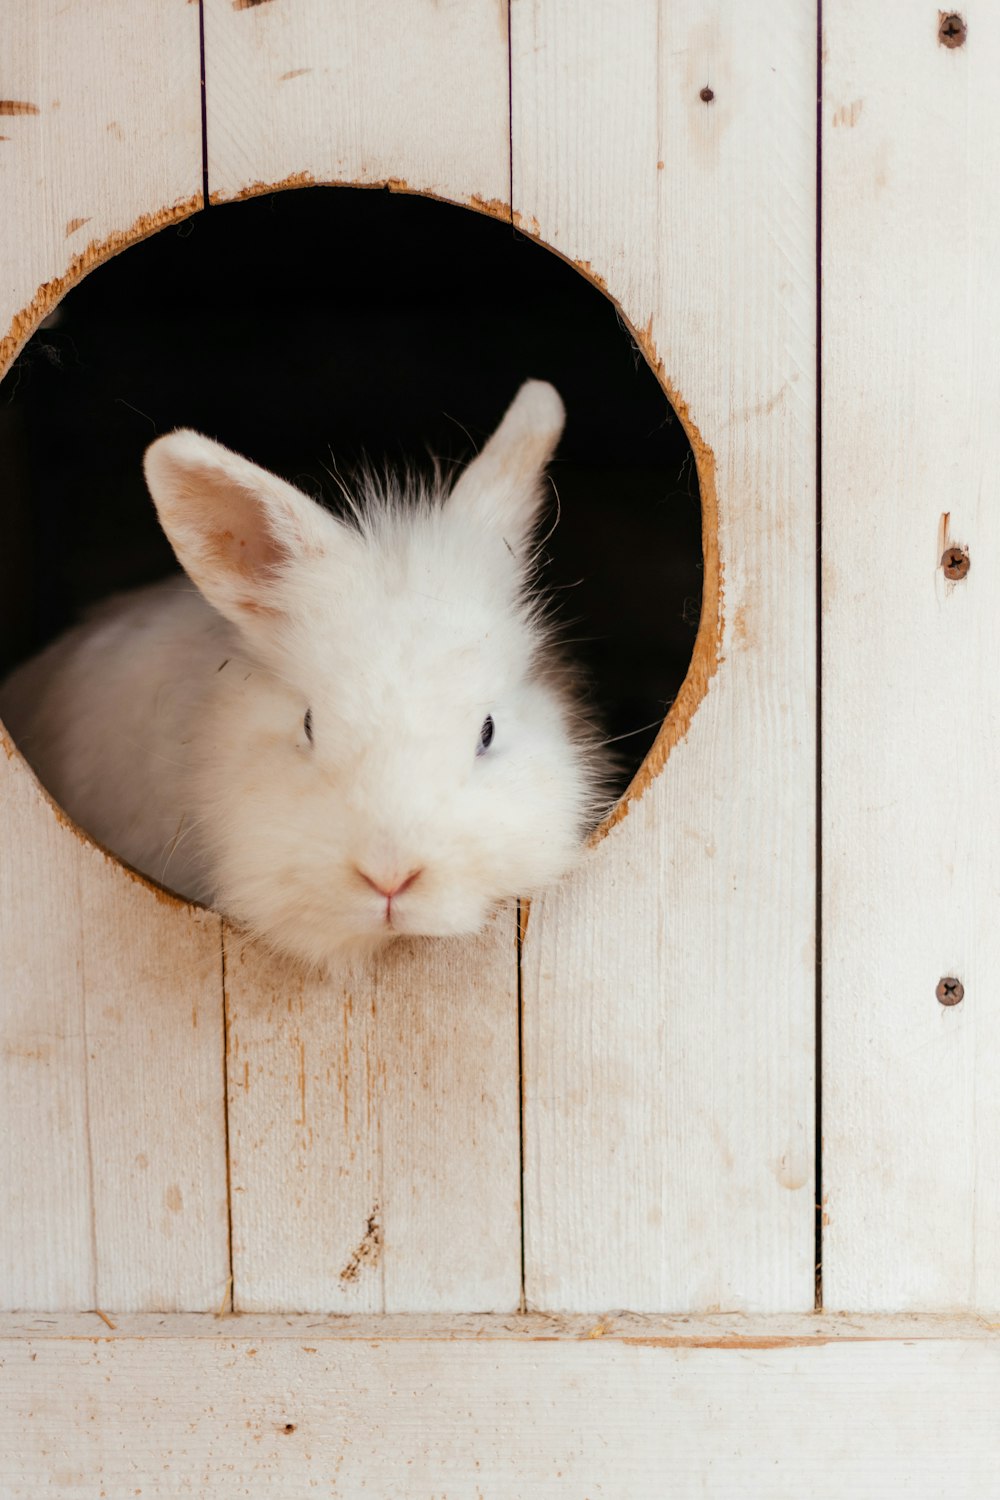 a small white rabbit sitting inside of a wooden box